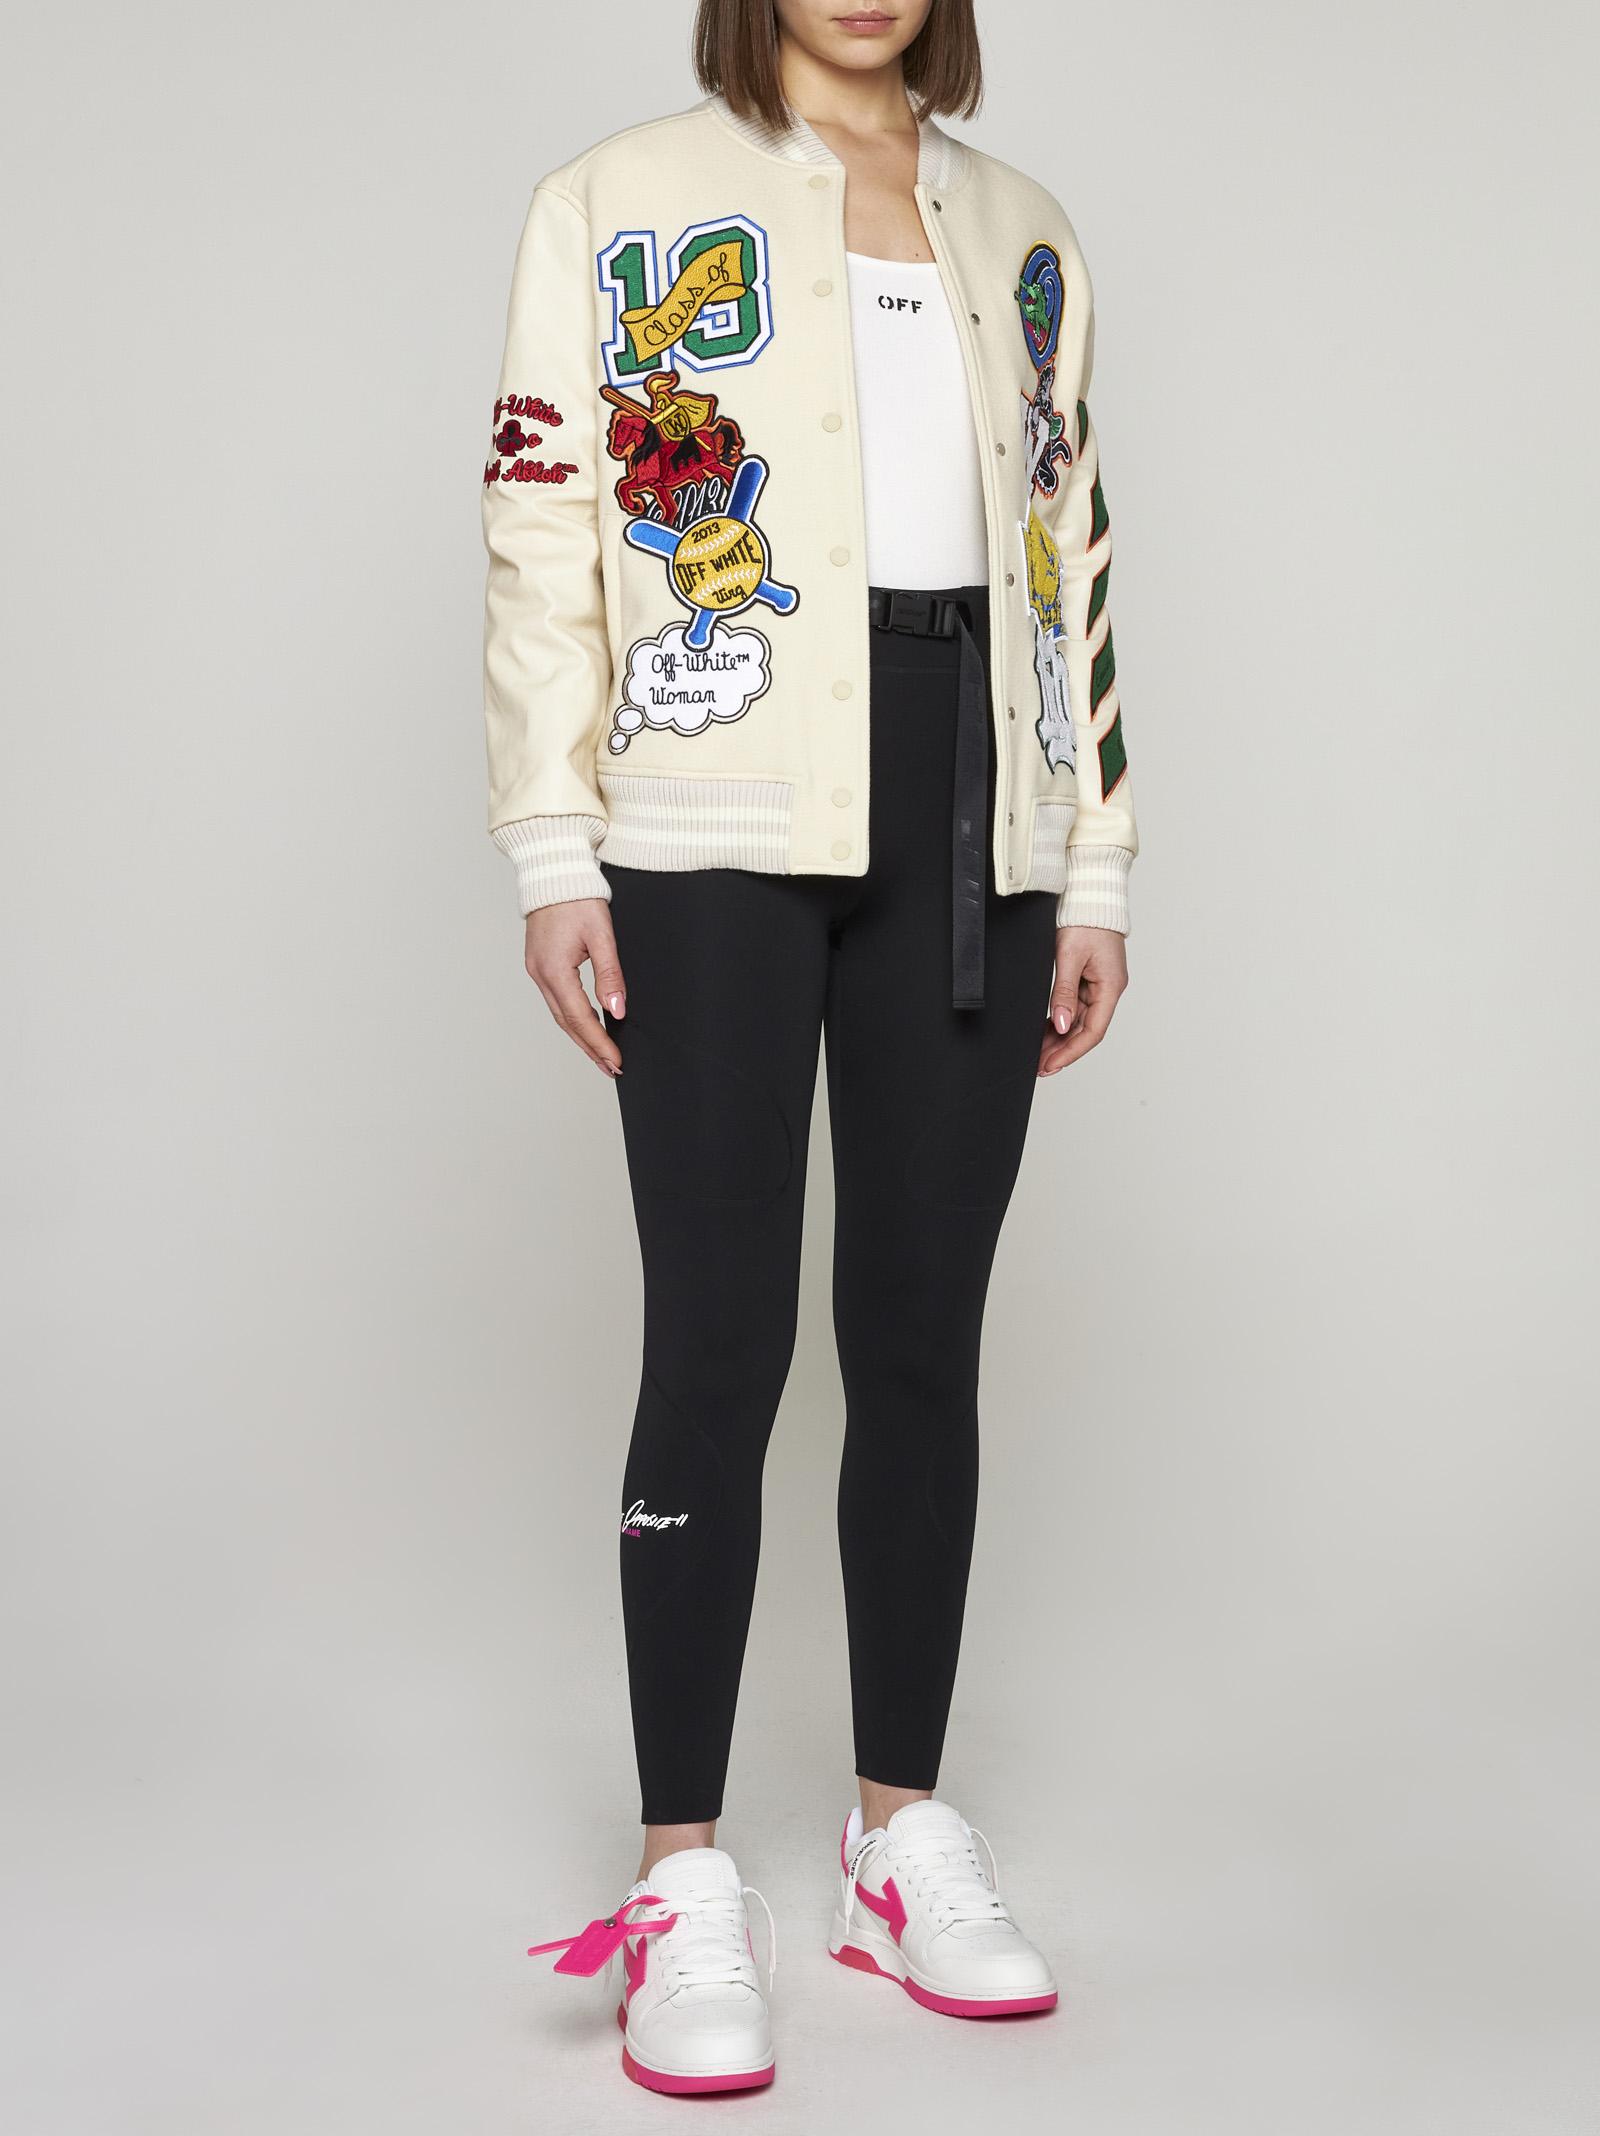 Off-White Bomber Jacket with Patches